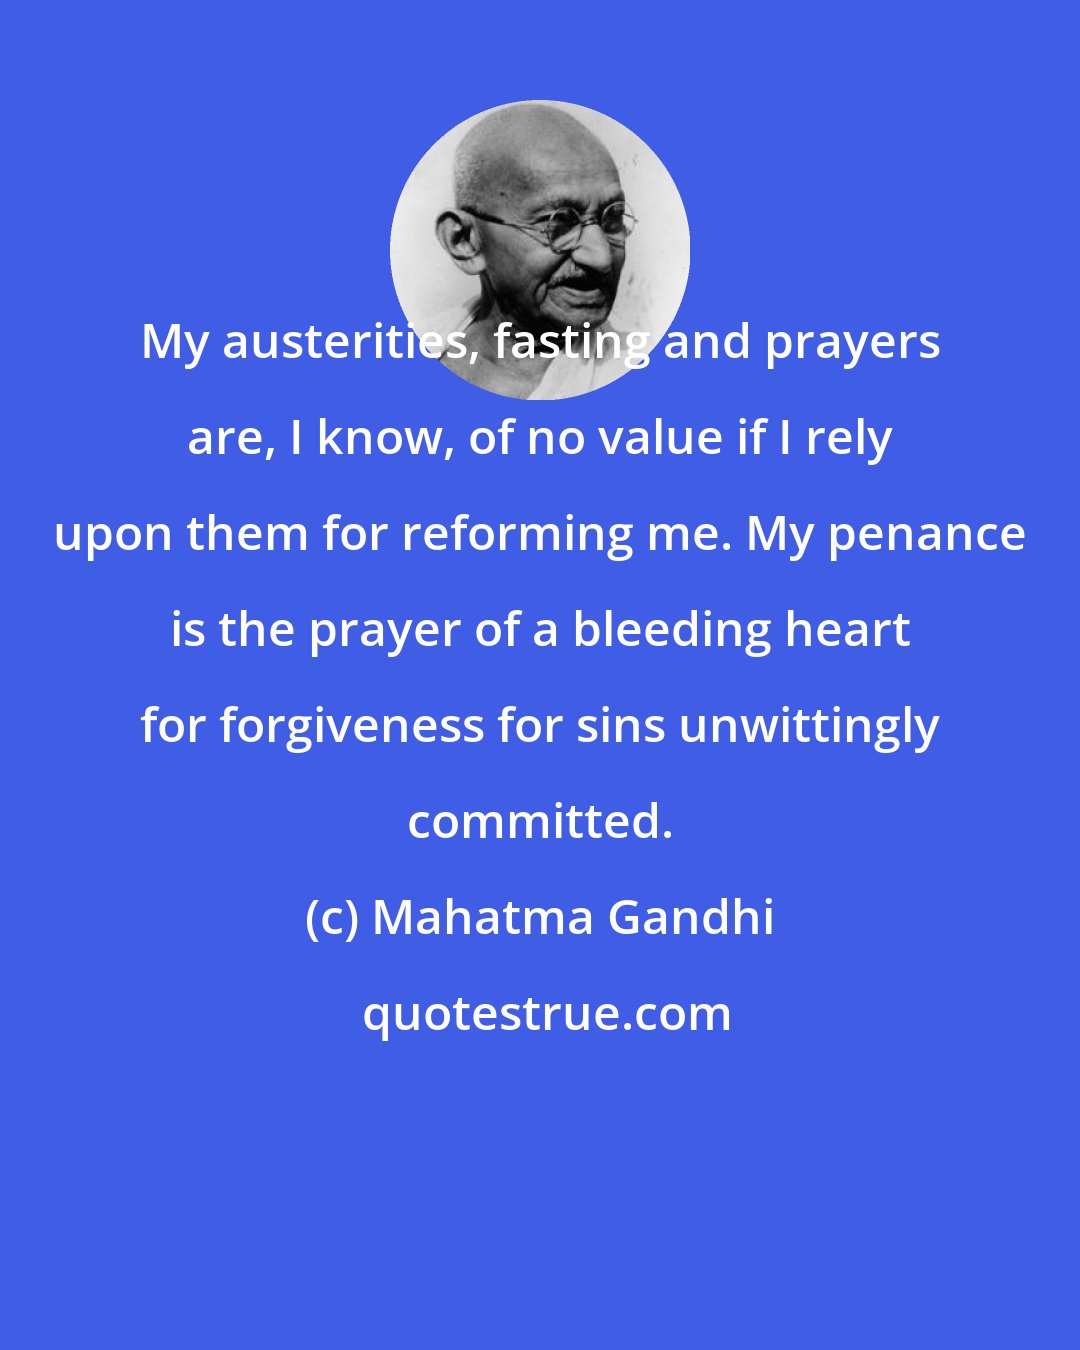 Mahatma Gandhi: My austerities, fasting and prayers are, I know, of no value if I rely upon them for reforming me. My penance is the prayer of a bleeding heart for forgiveness for sins unwittingly committed.